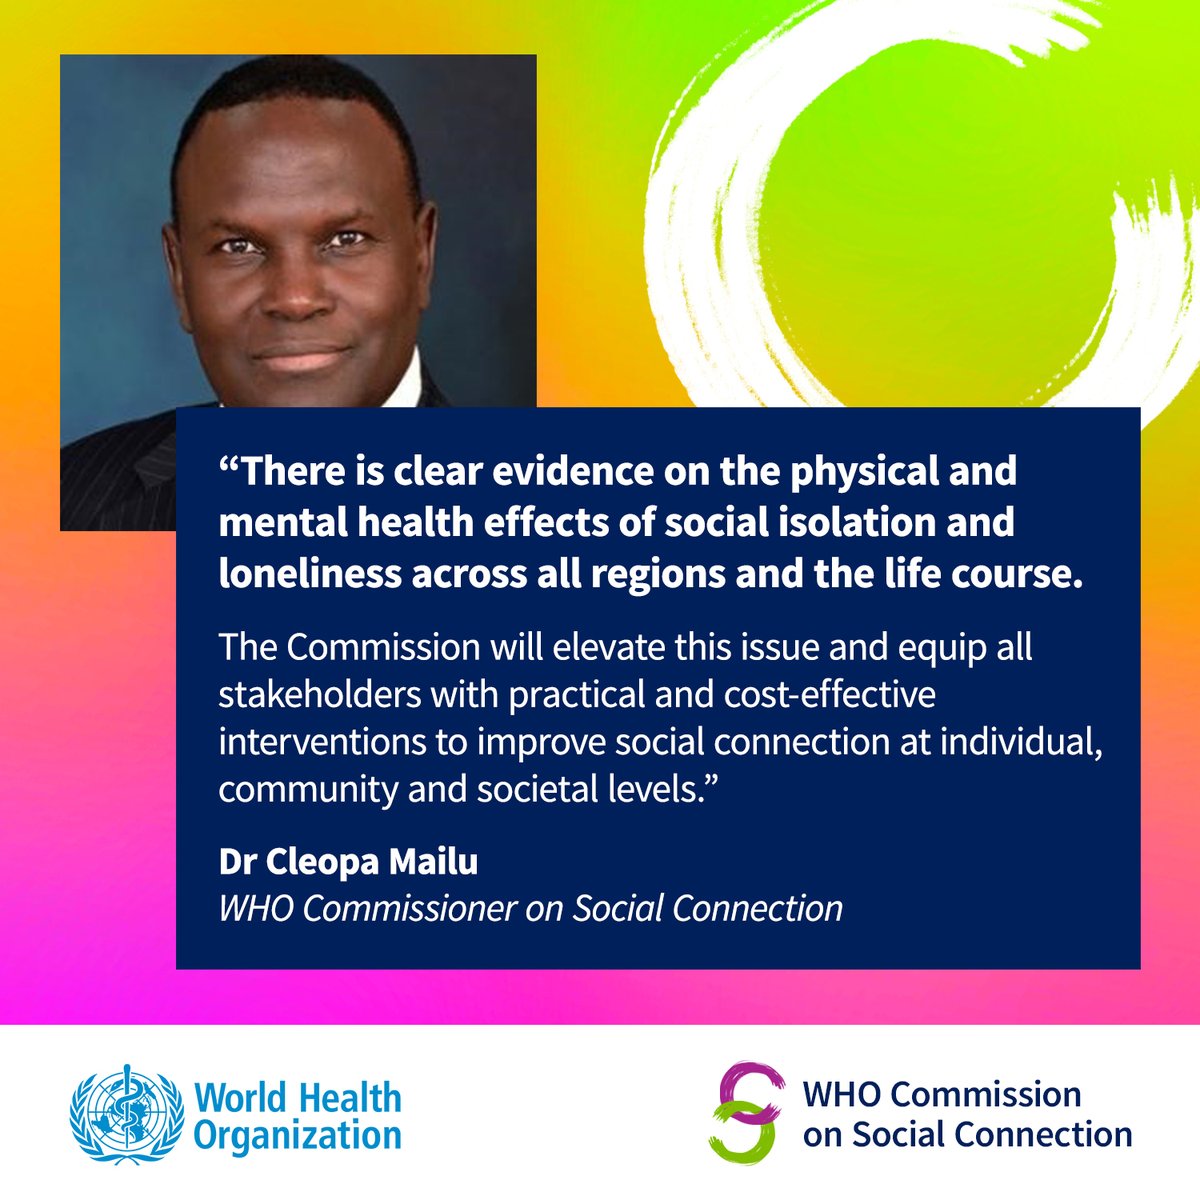 The #PowerOfConnection can improve the health&well-being of people of all ages. It can also foster economic progress, social development & innovation. H.E Amb. Cleopa Mailu is glad to be part of the new @WHO Commission on Social Connection that aims to address this issue globally